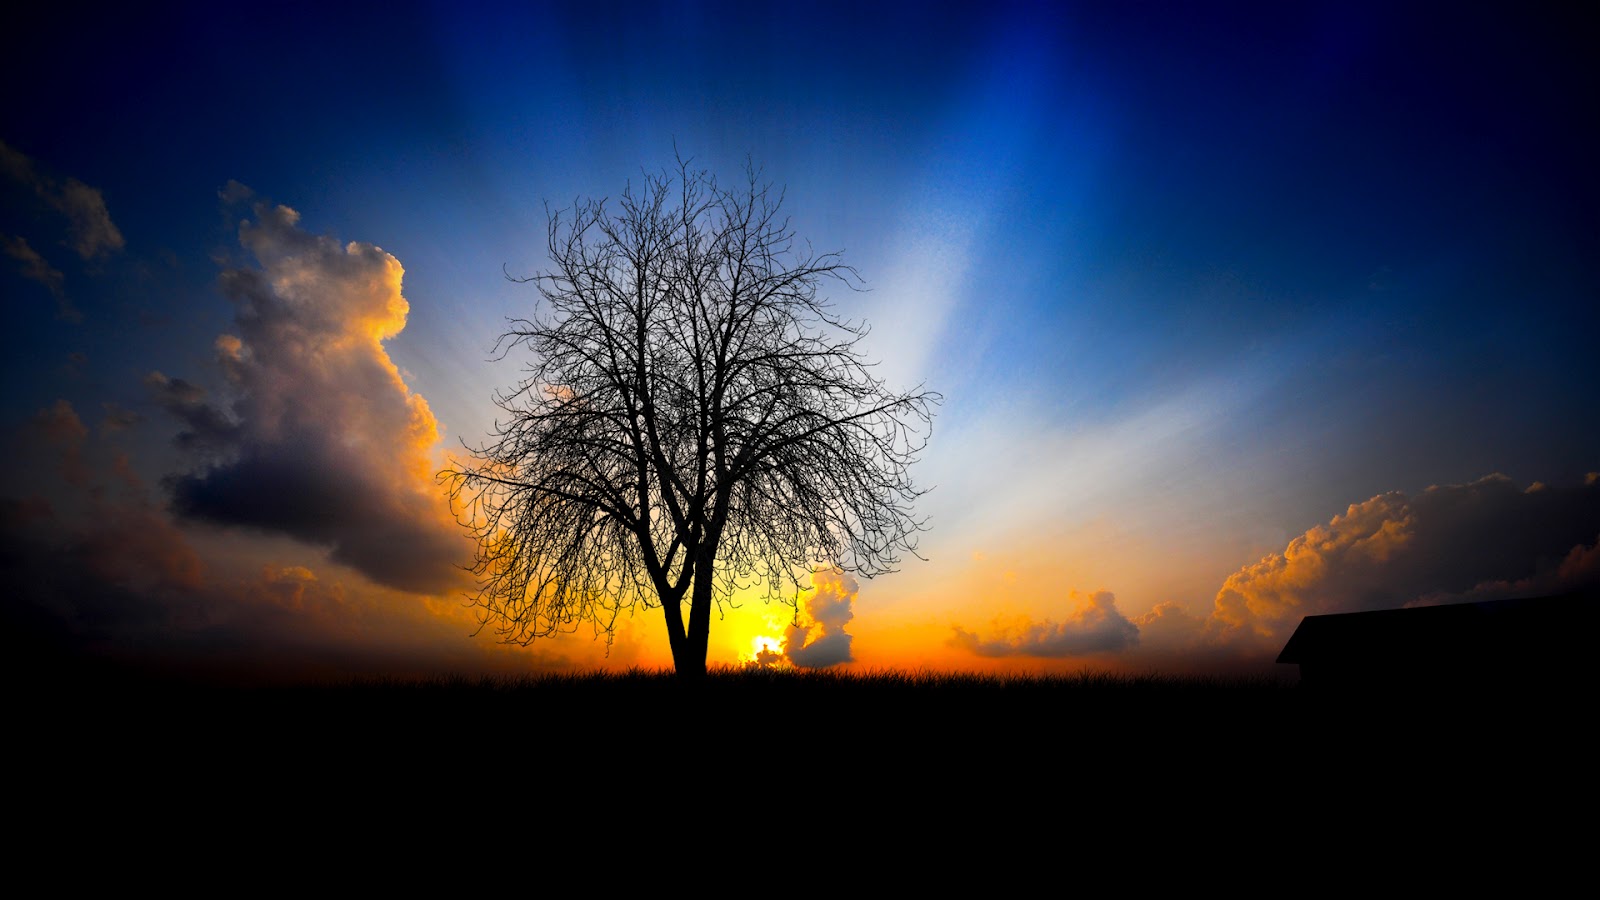 Real Sunrise Front Tree New Xp Wallpaper Pc Laptop Mobile Walls